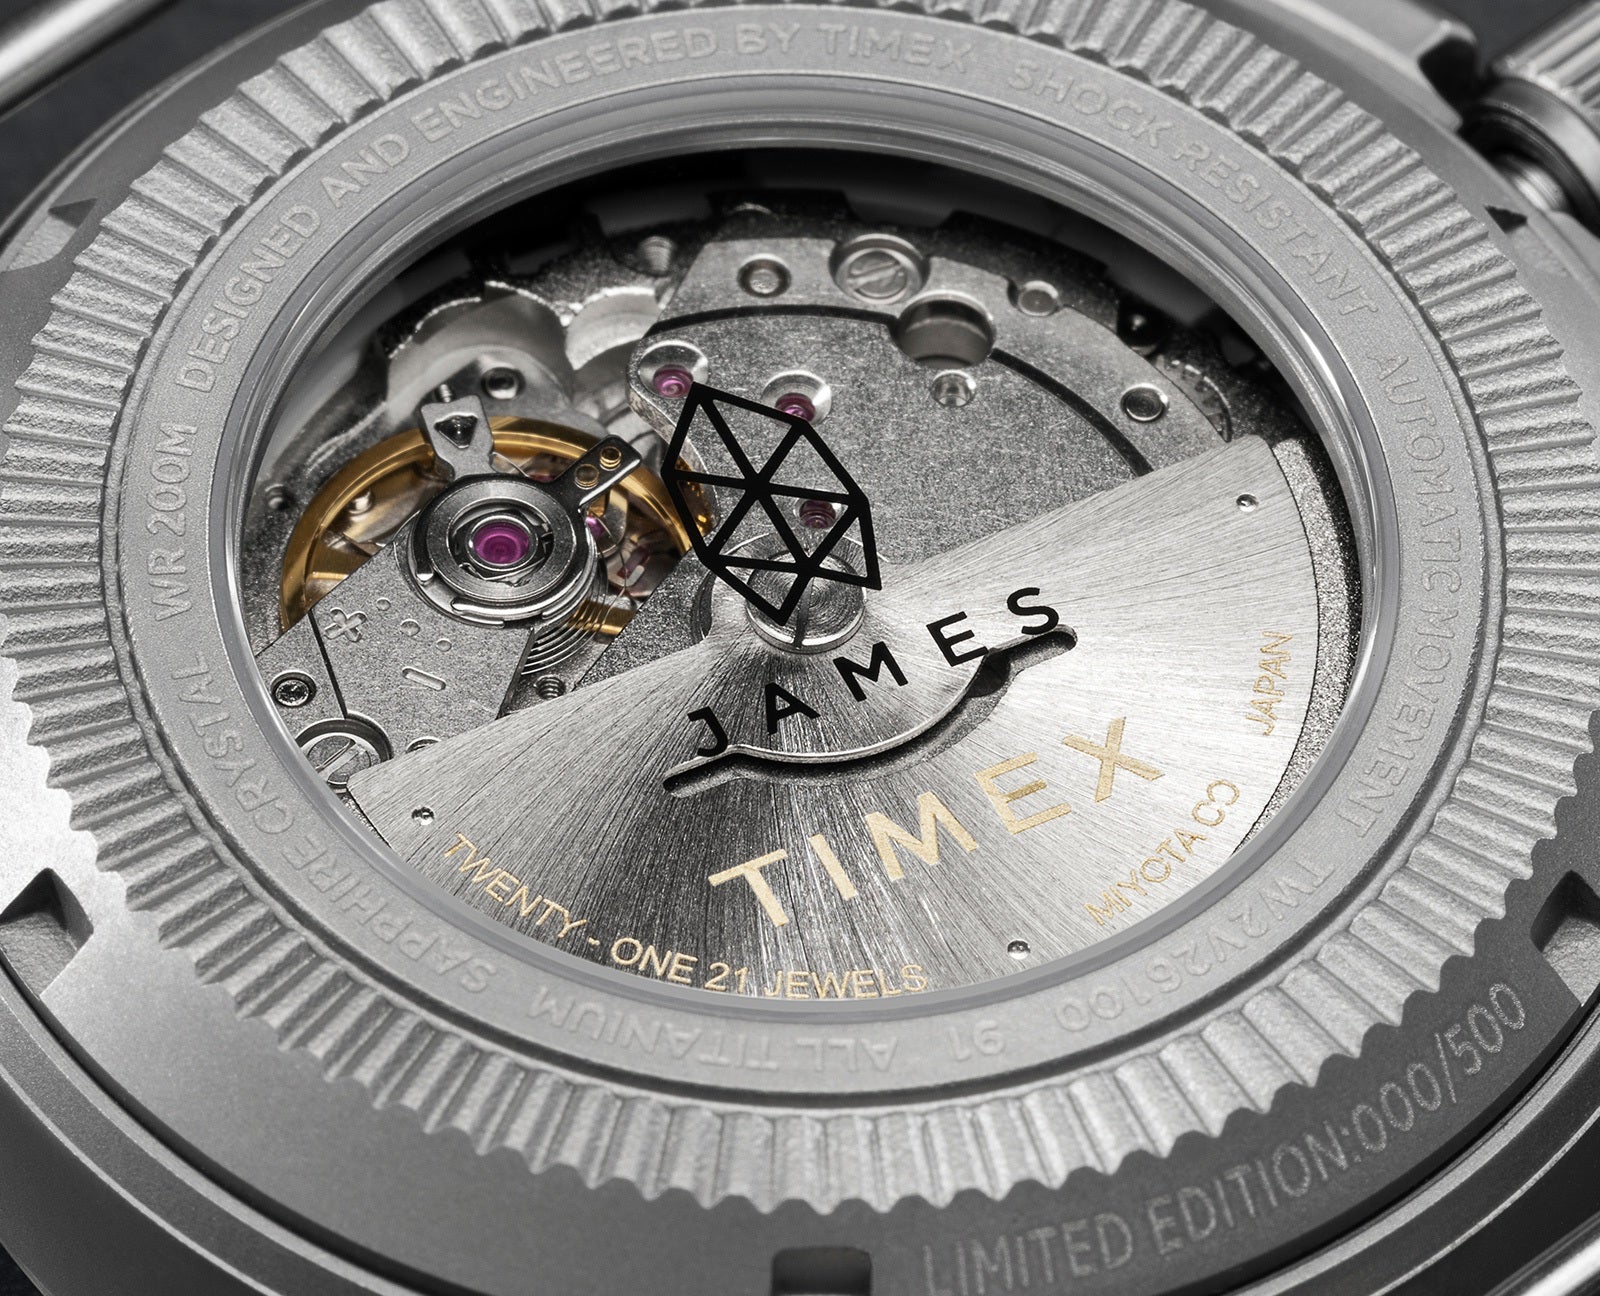 James & Timex: Expedition North Titanium Automatic Watch – The James Brand